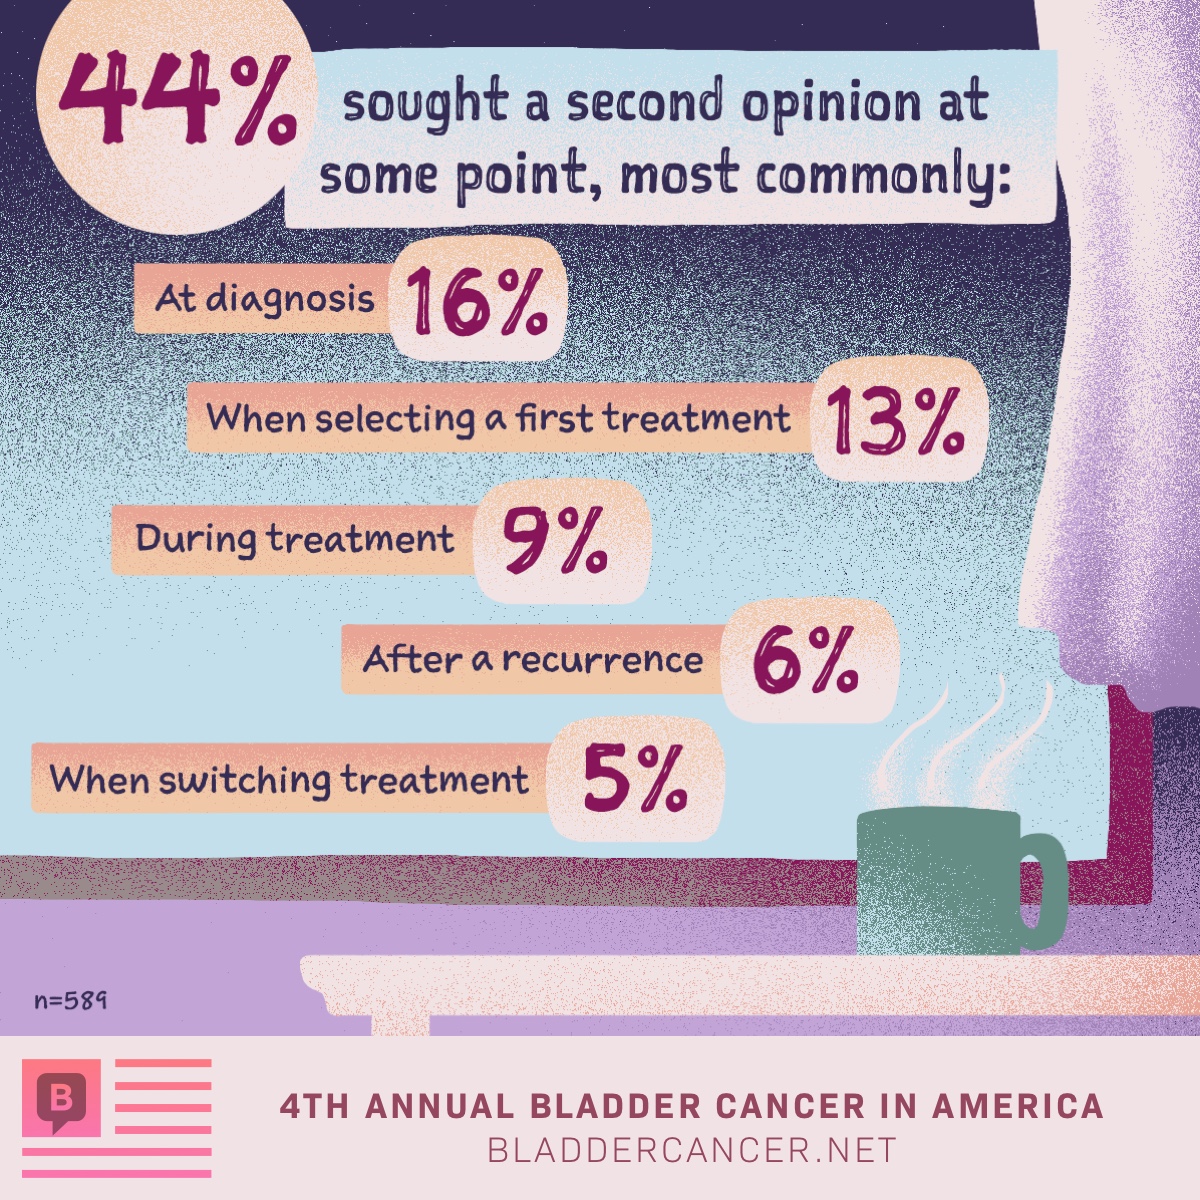 44% sought a second opinion at some point, most commonly at diagnosis or when selecting a first treatment.